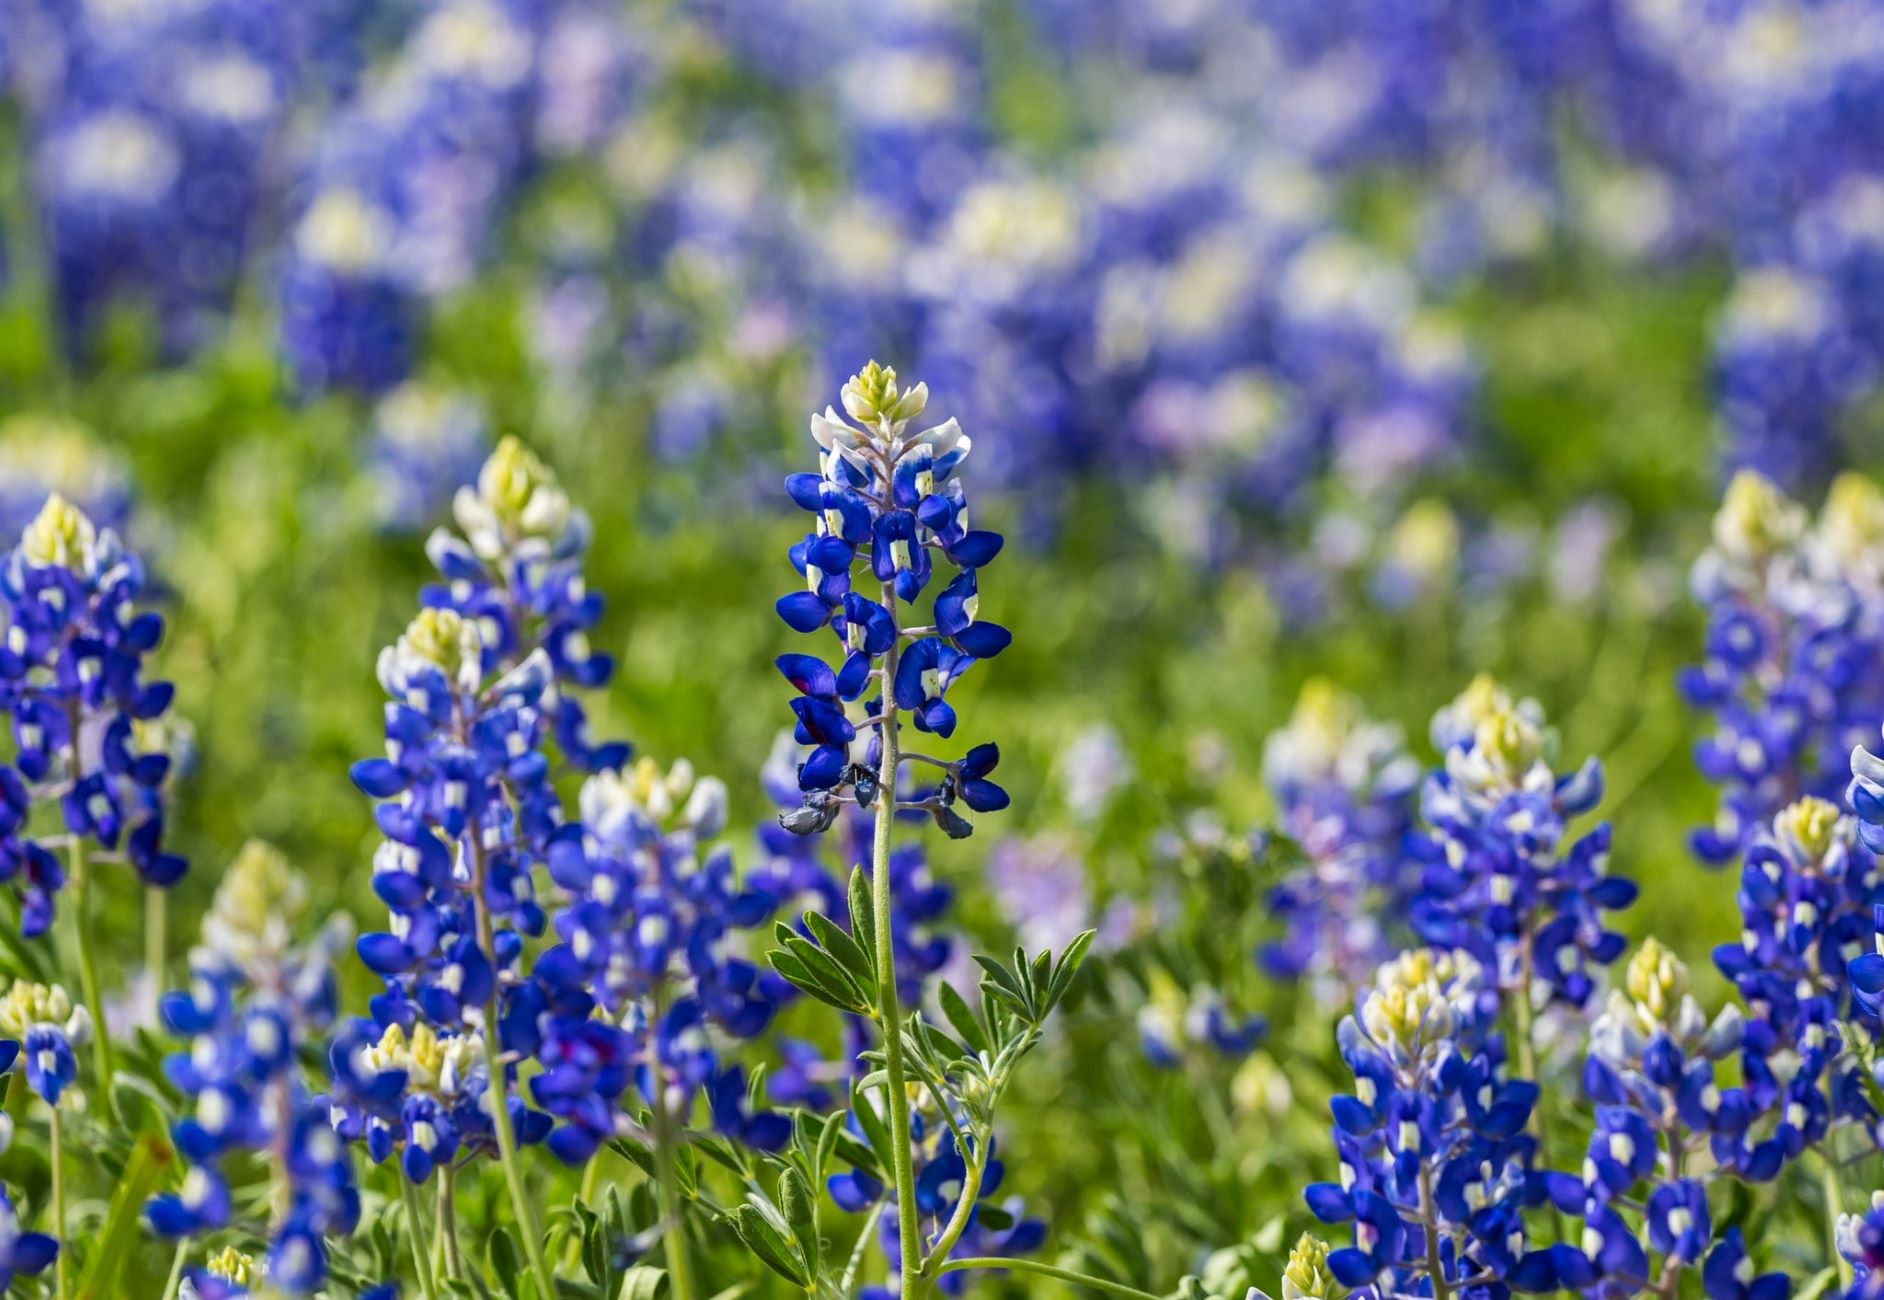 When To Plant Bluebonnet Seeds